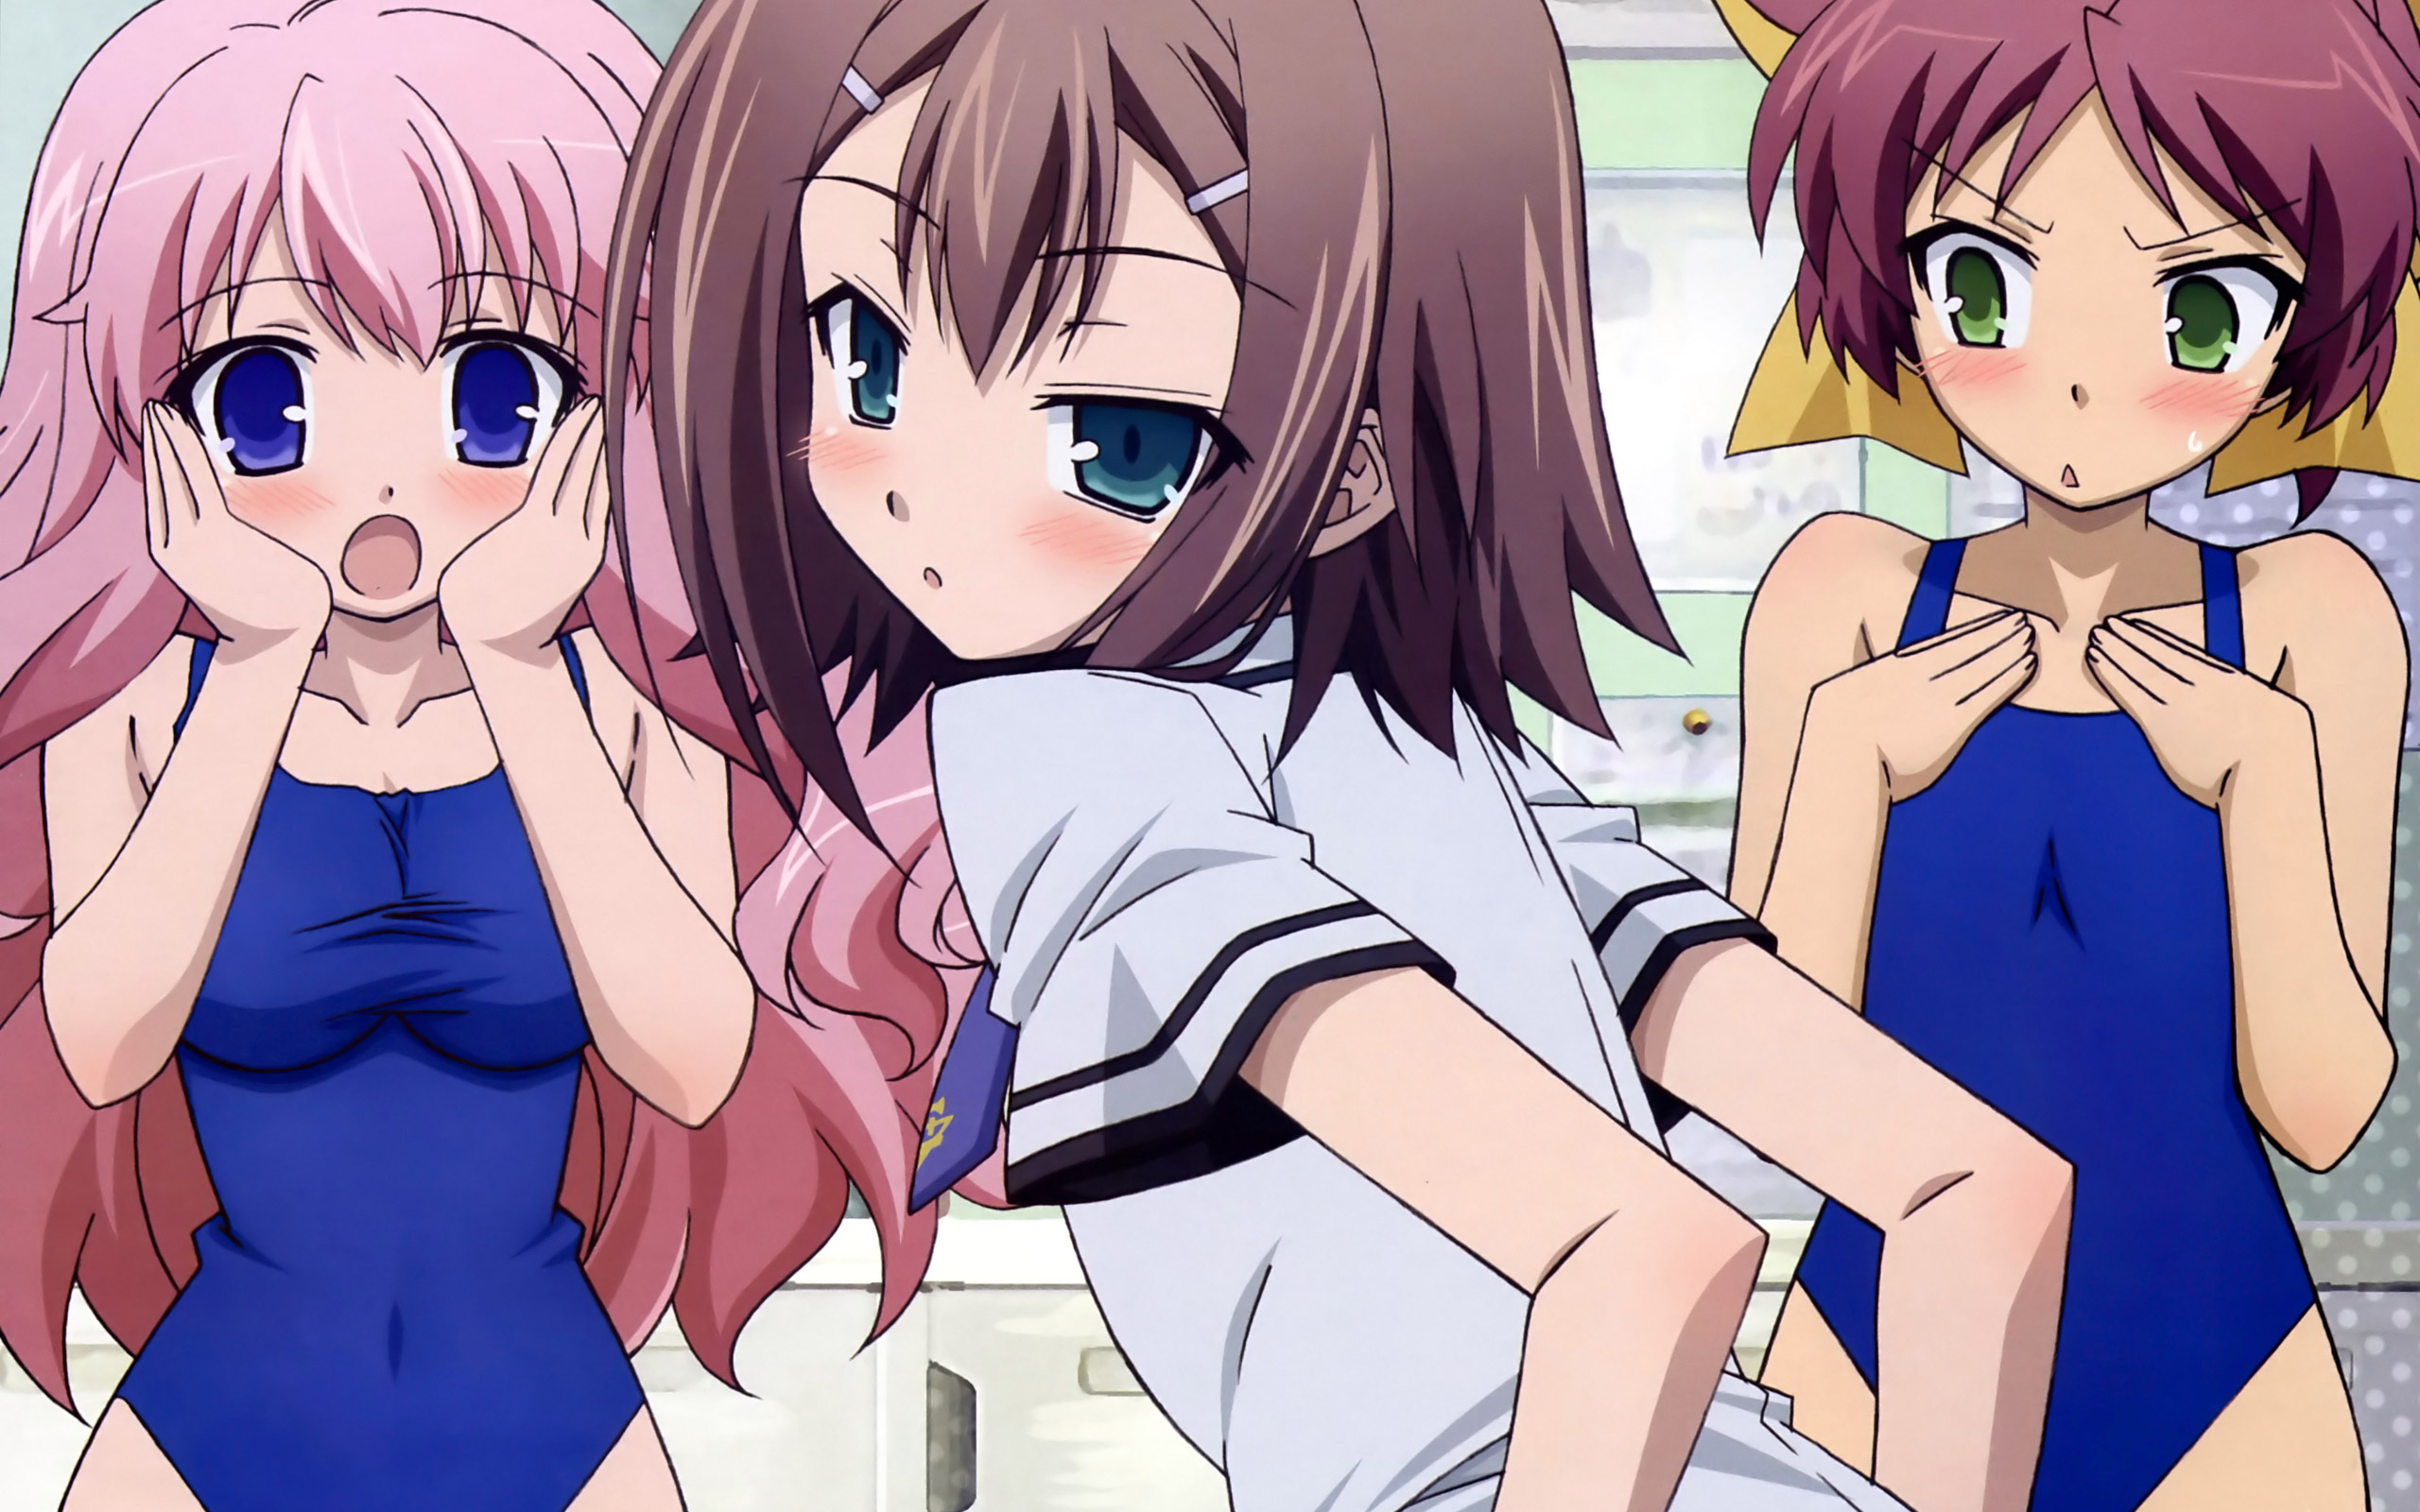 Download Anime Baka And Test Hd Wallpaper 9211